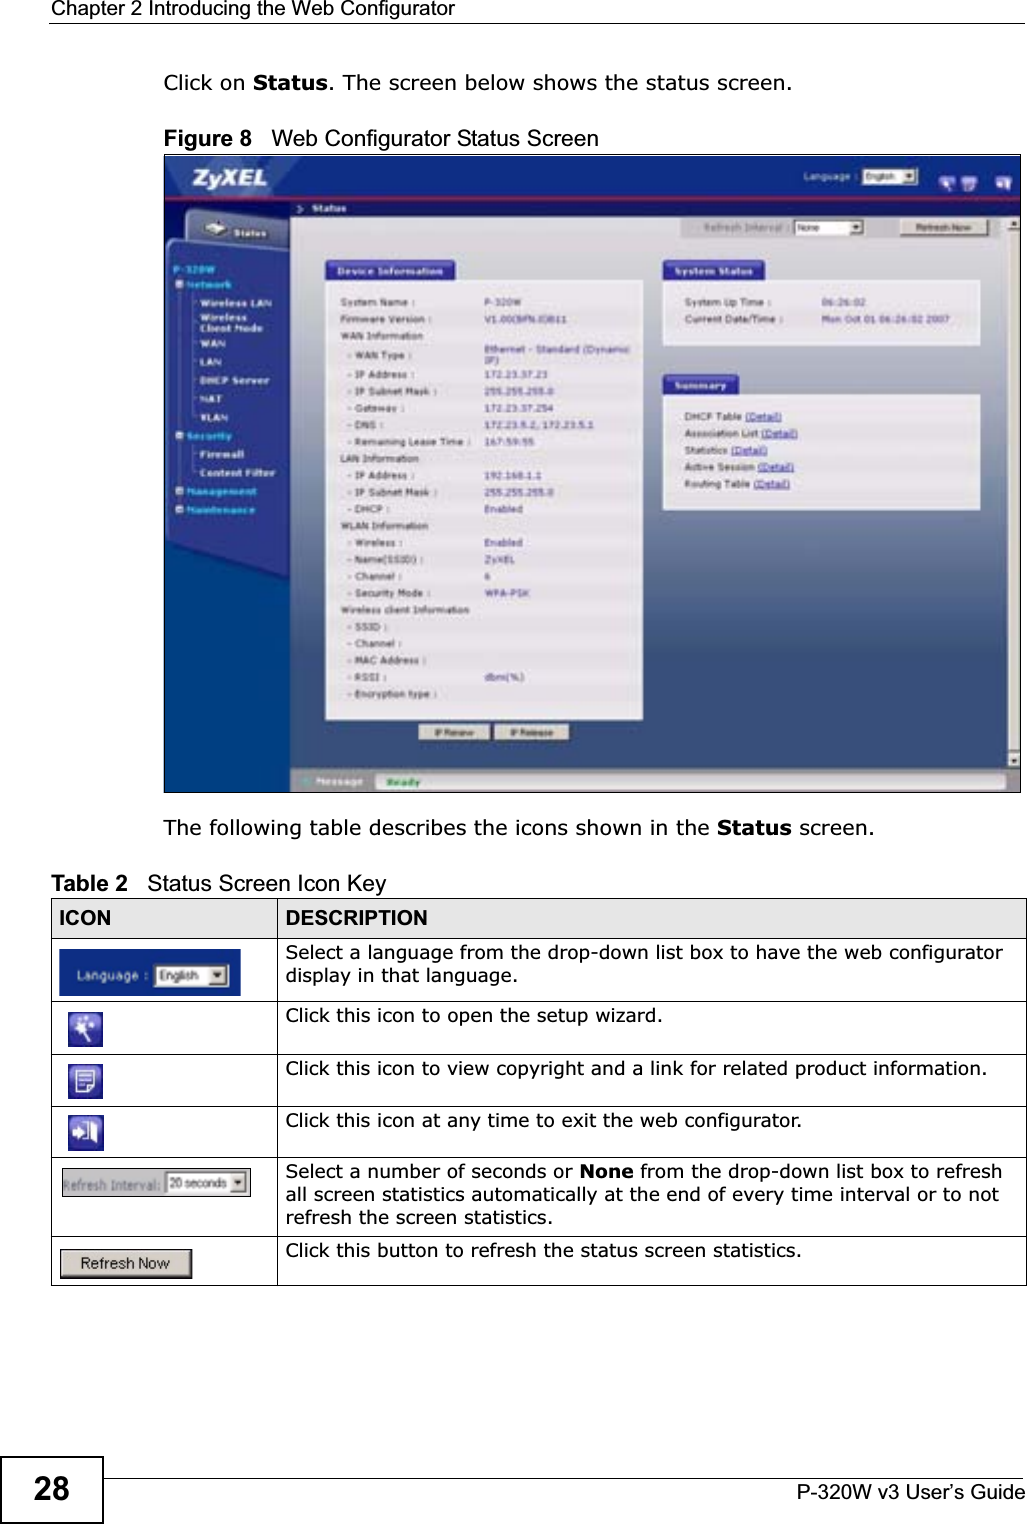 Chapter 2 Introducing the Web ConfiguratorP-320W v3 User’s Guide28Click on Status. The screen below shows the status screen. Figure 8   Web Configurator Status Screen The following table describes the icons shown in the Status screen.Table 2   Status Screen Icon KeyICON DESCRIPTIONSelect a language from the drop-down list box to have the web configurator display in that language.Click this icon to open the setup wizard. Click this icon to view copyright and a link for related product information.Click this icon at any time to exit the web configurator.Select a number of seconds or None from the drop-down list box to refresh all screen statistics automatically at the end of every time interval or to not refresh the screen statistics.Click this button to refresh the status screen statistics.